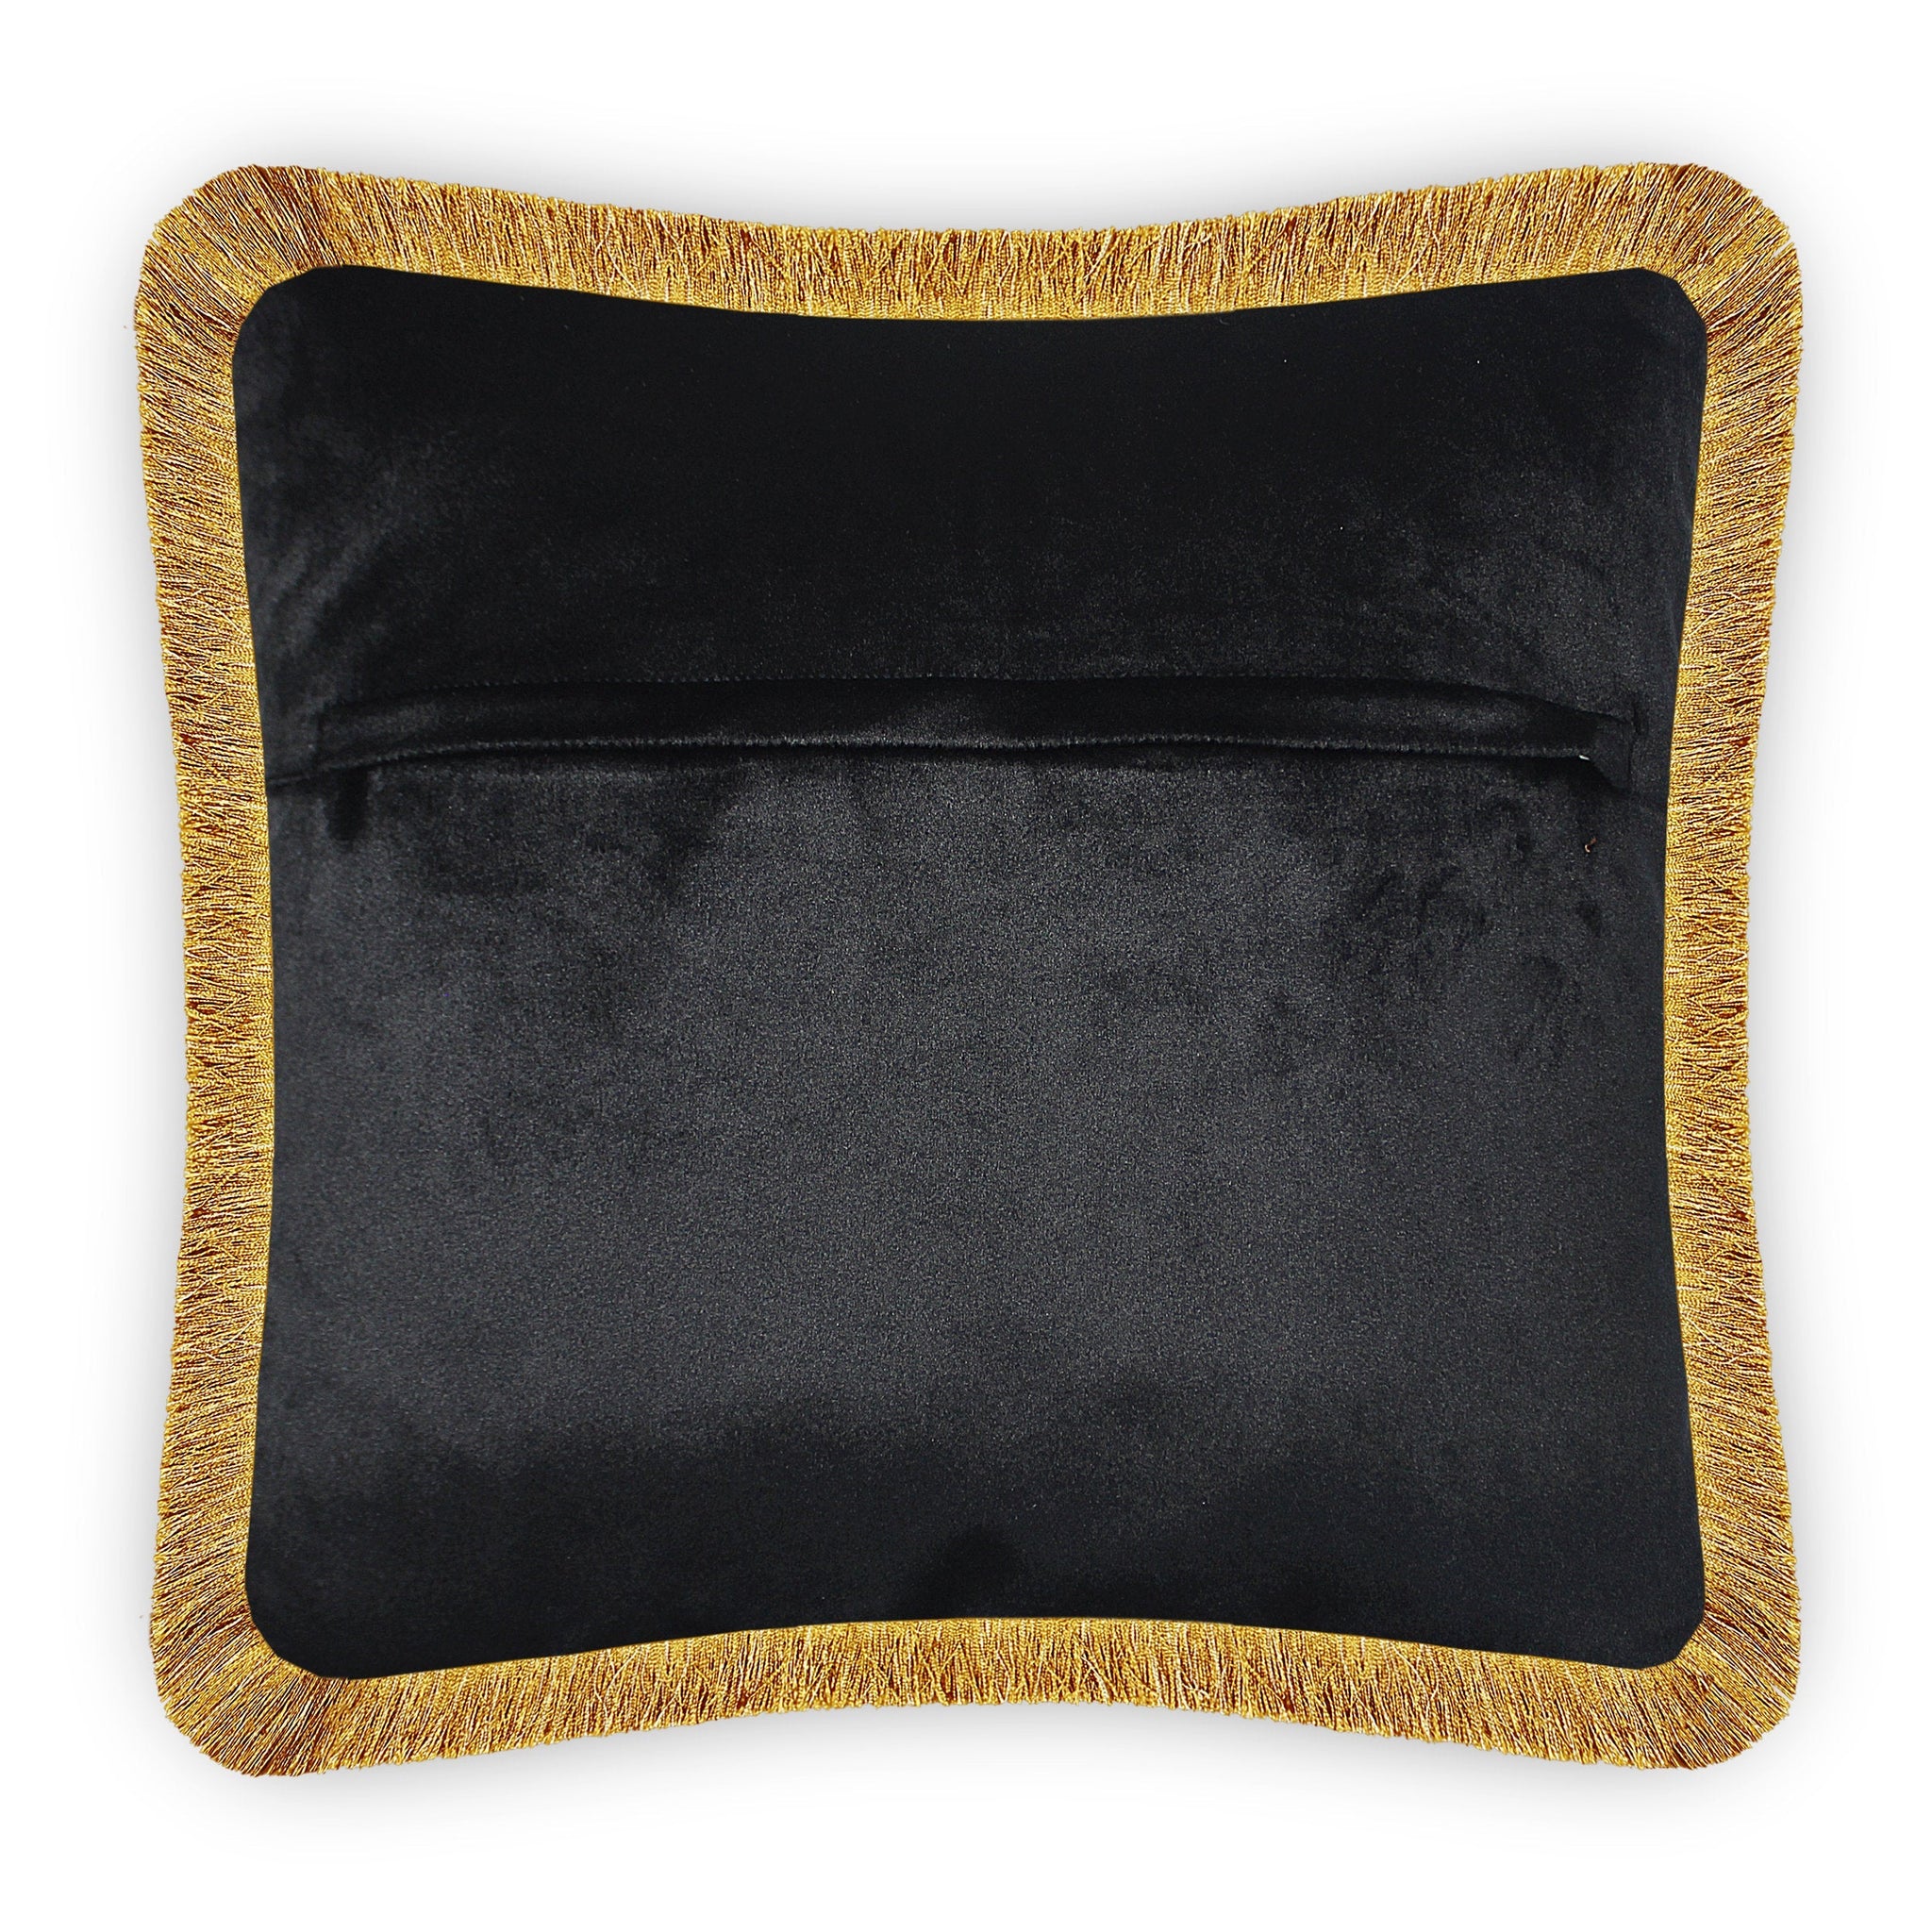 Cushion Cover Velvet Colorful Feather Decorative Pillowcase Embroidery Throw Pillow for Sofa Chair Bedroom Living Room Black 45x45 cm (18x18 Inches)